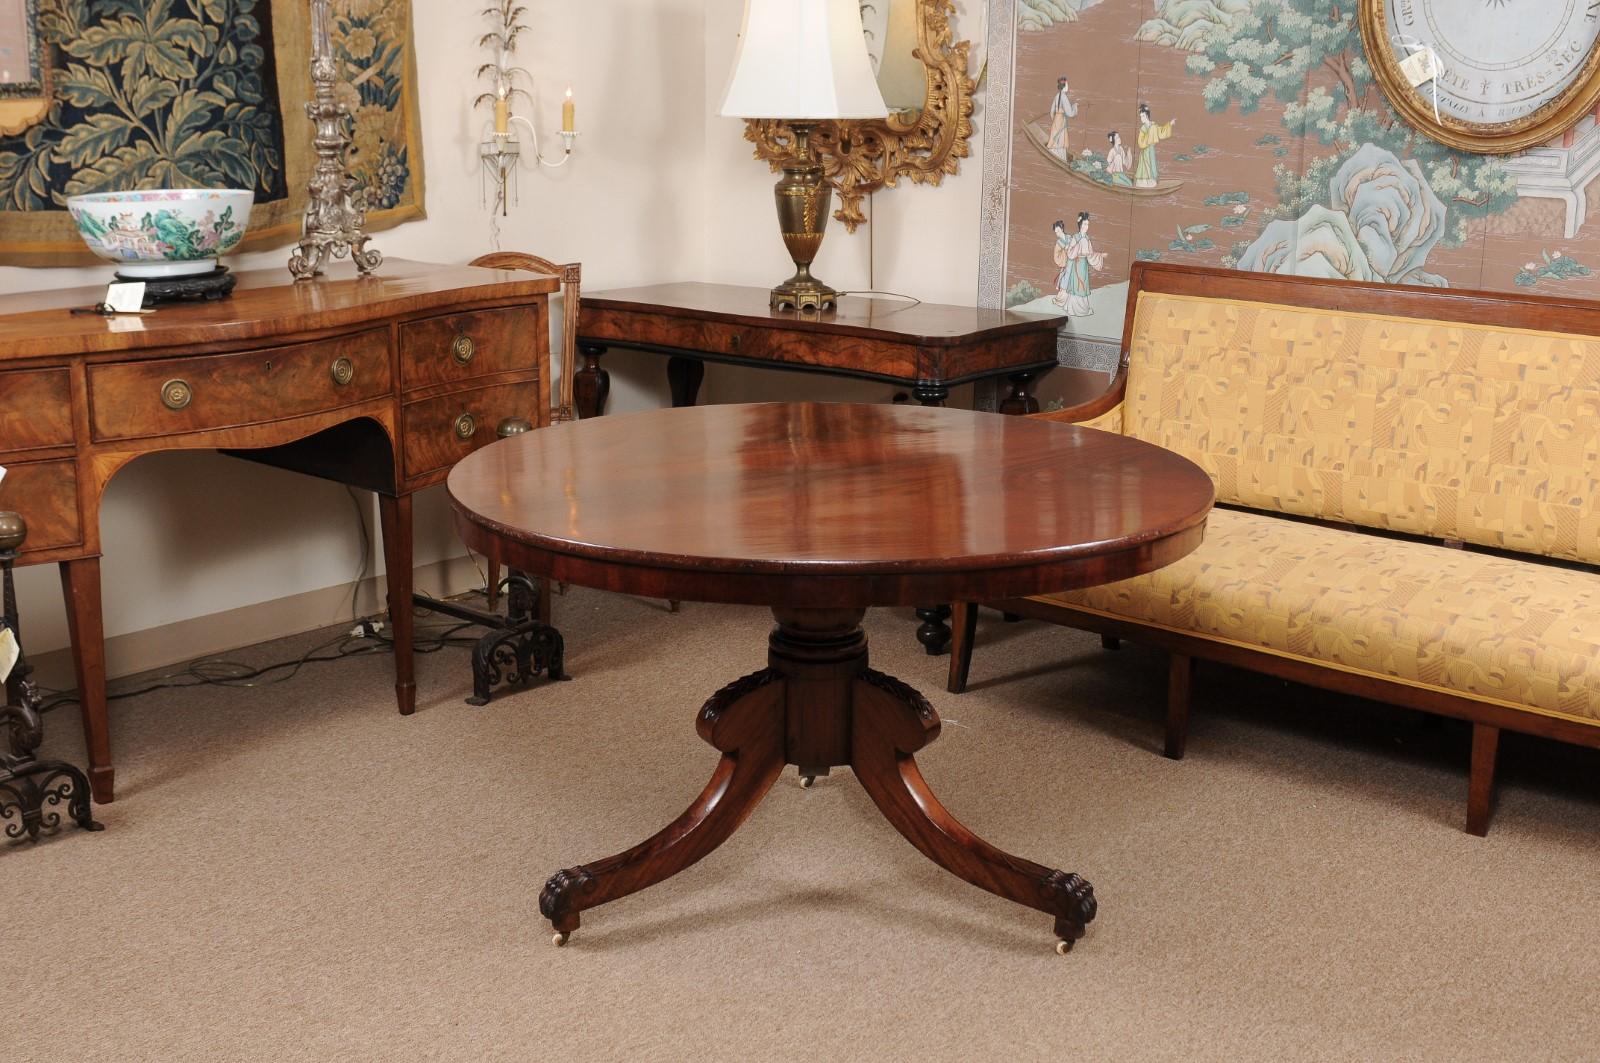 19th Century English Mahogany Center Table with Pedestal Base & 3 Splayed Legs  In Good Condition For Sale In Atlanta, GA